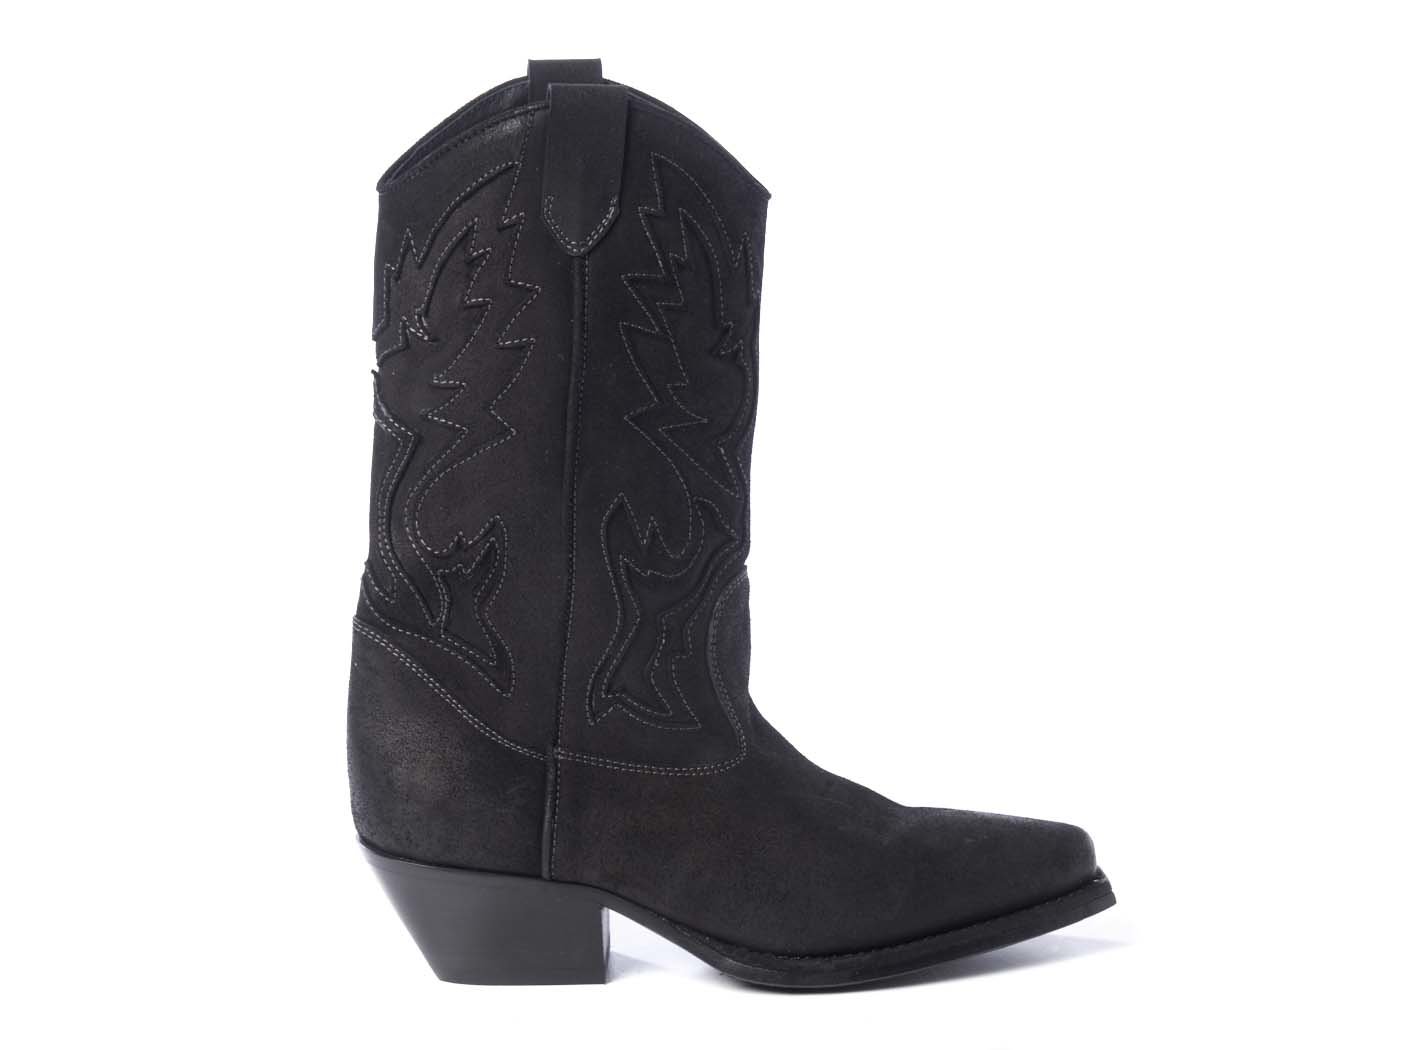 cheapest place to buy cowboy boots